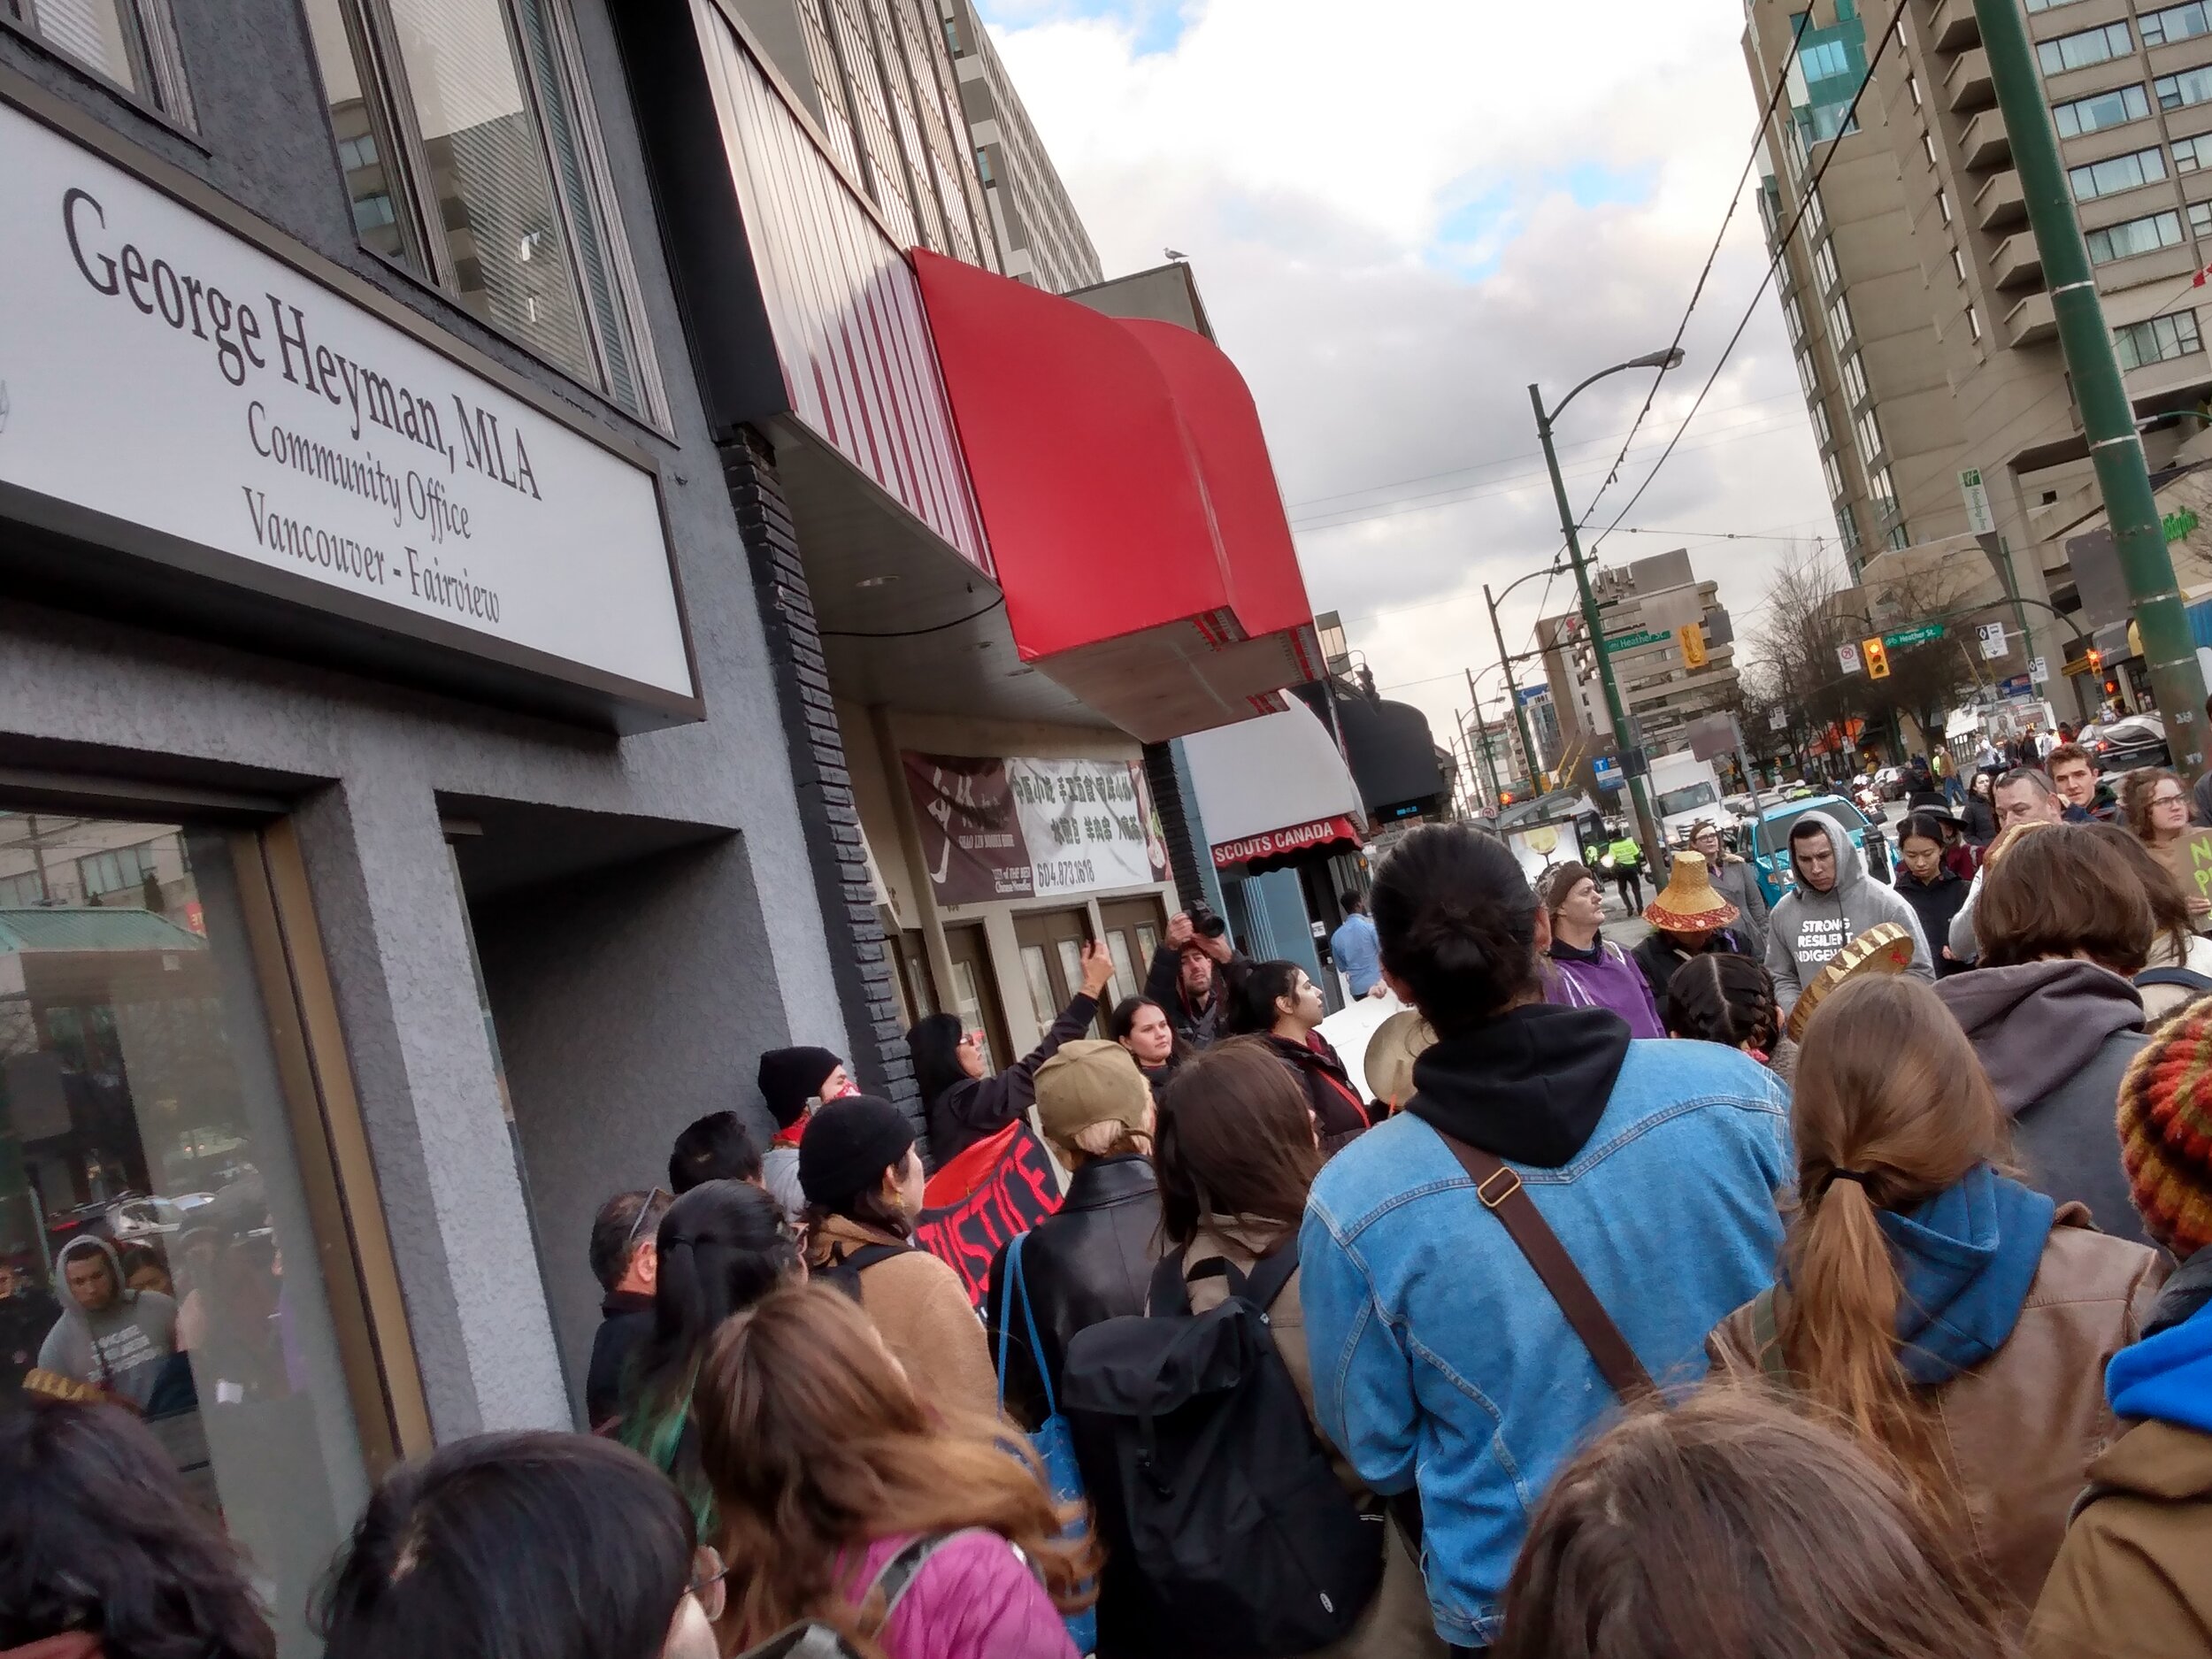 Student walkout, rally, and march in solidarity with Wet'suwet'en - Vancouver, Jan 2020 (10).jpg